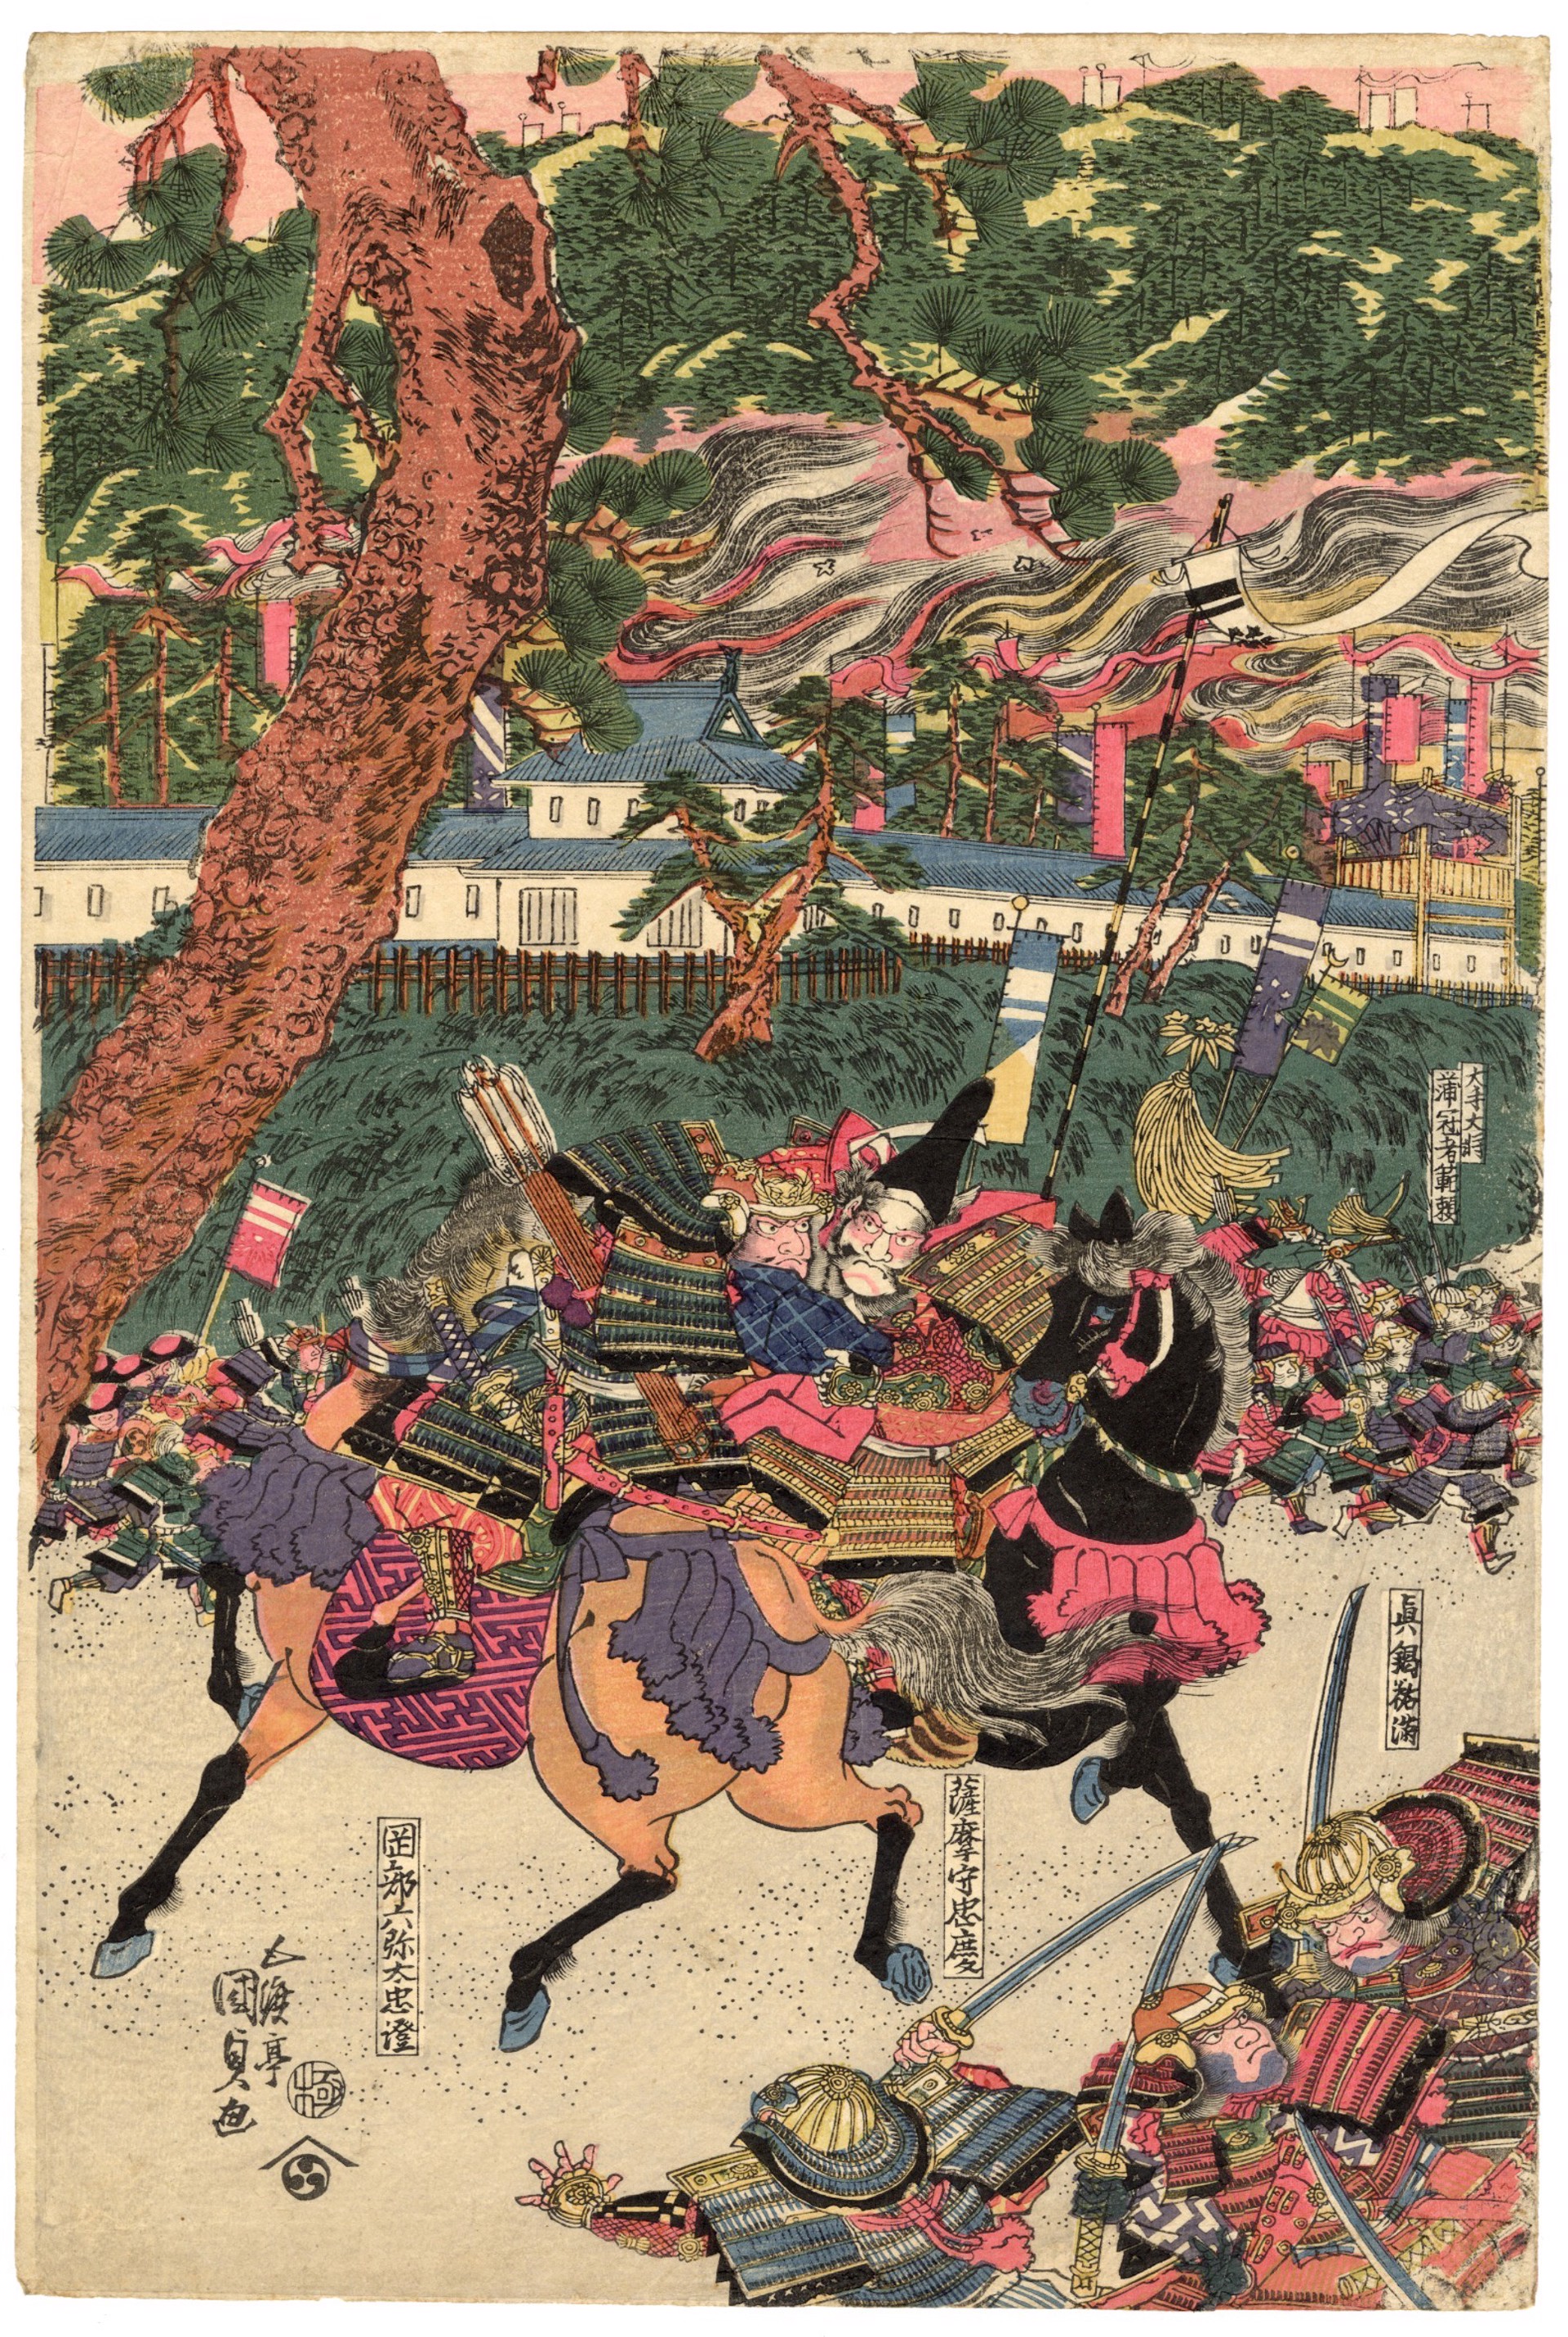 The Great Battle of the Genji (Minamoto) and the Heike (Taira) at the Imperial Palace in Suma Province During the Genpei Wars by Kunisada